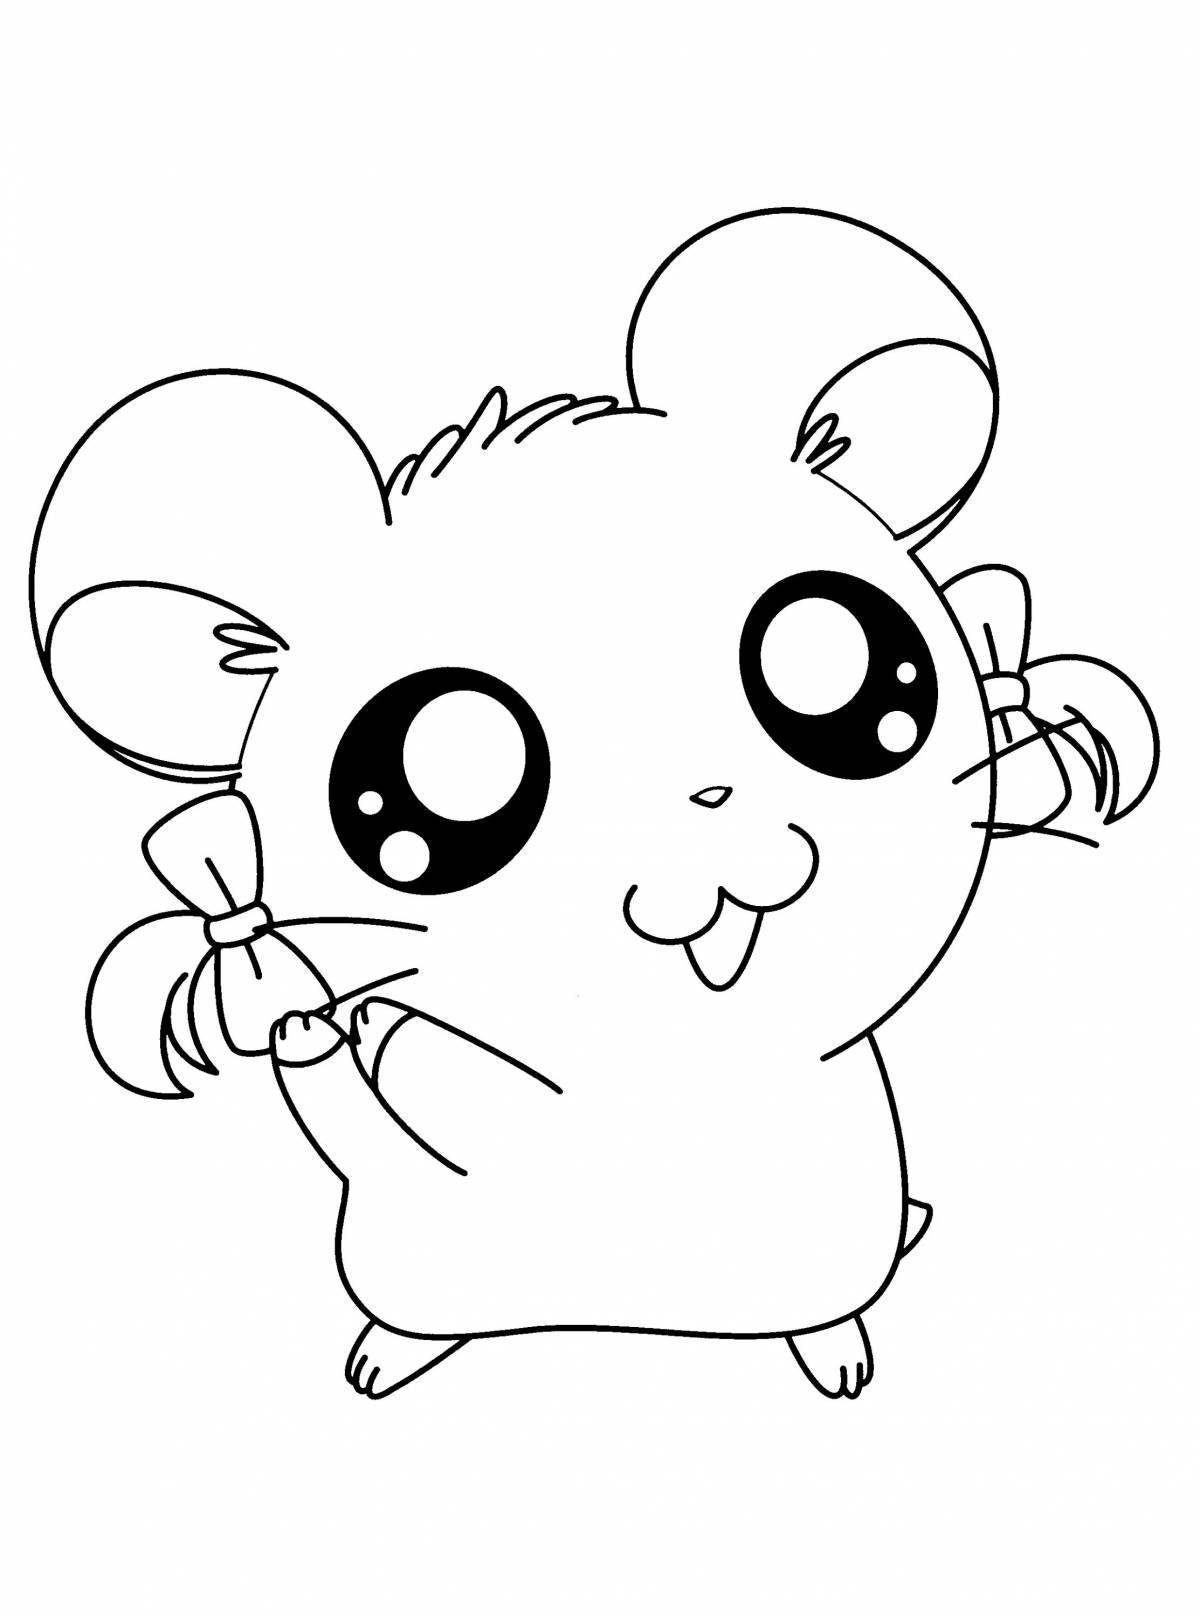 Tiny hamster coloring pages